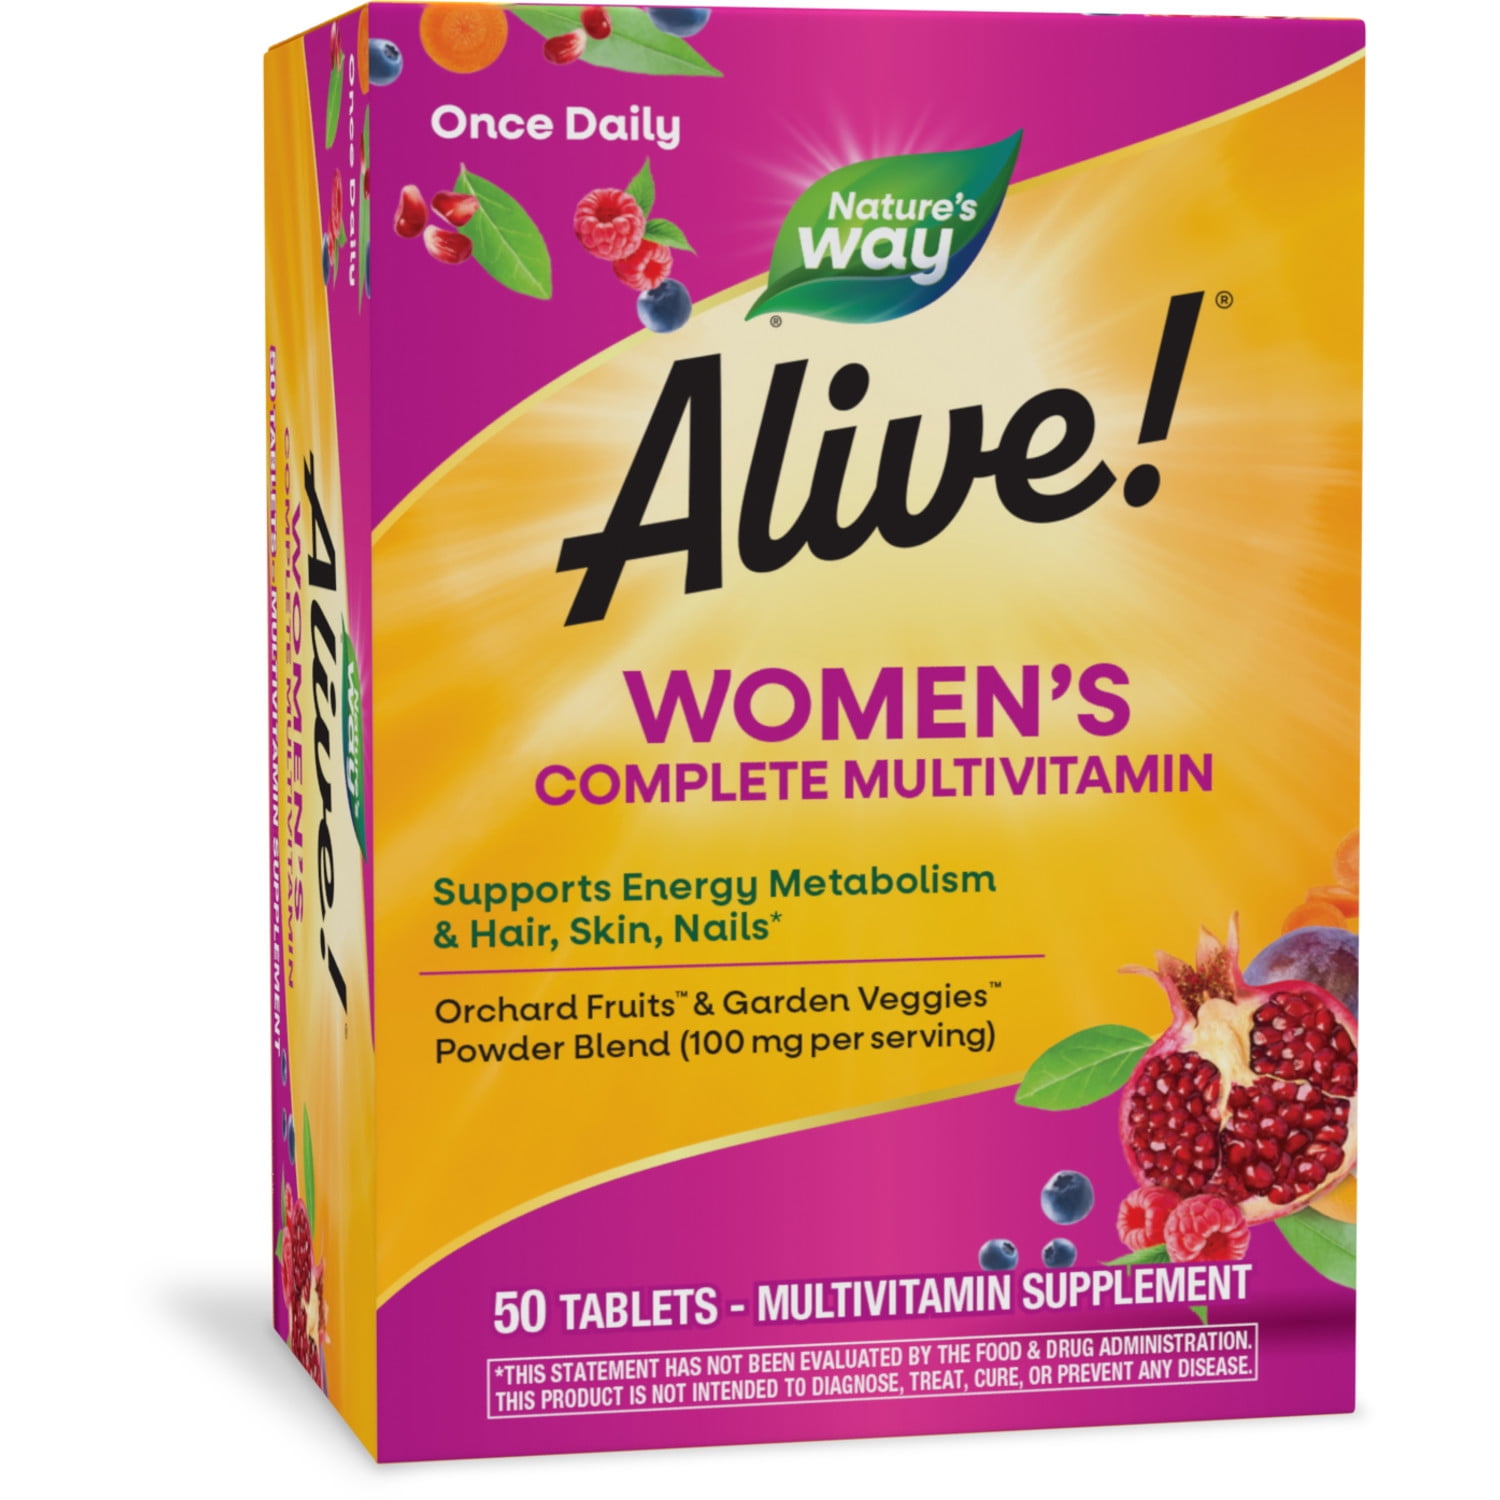 Rotamedics – EVERYWOMAN Once Daily Complete Multivitamins & Minerals Tablet  by 30